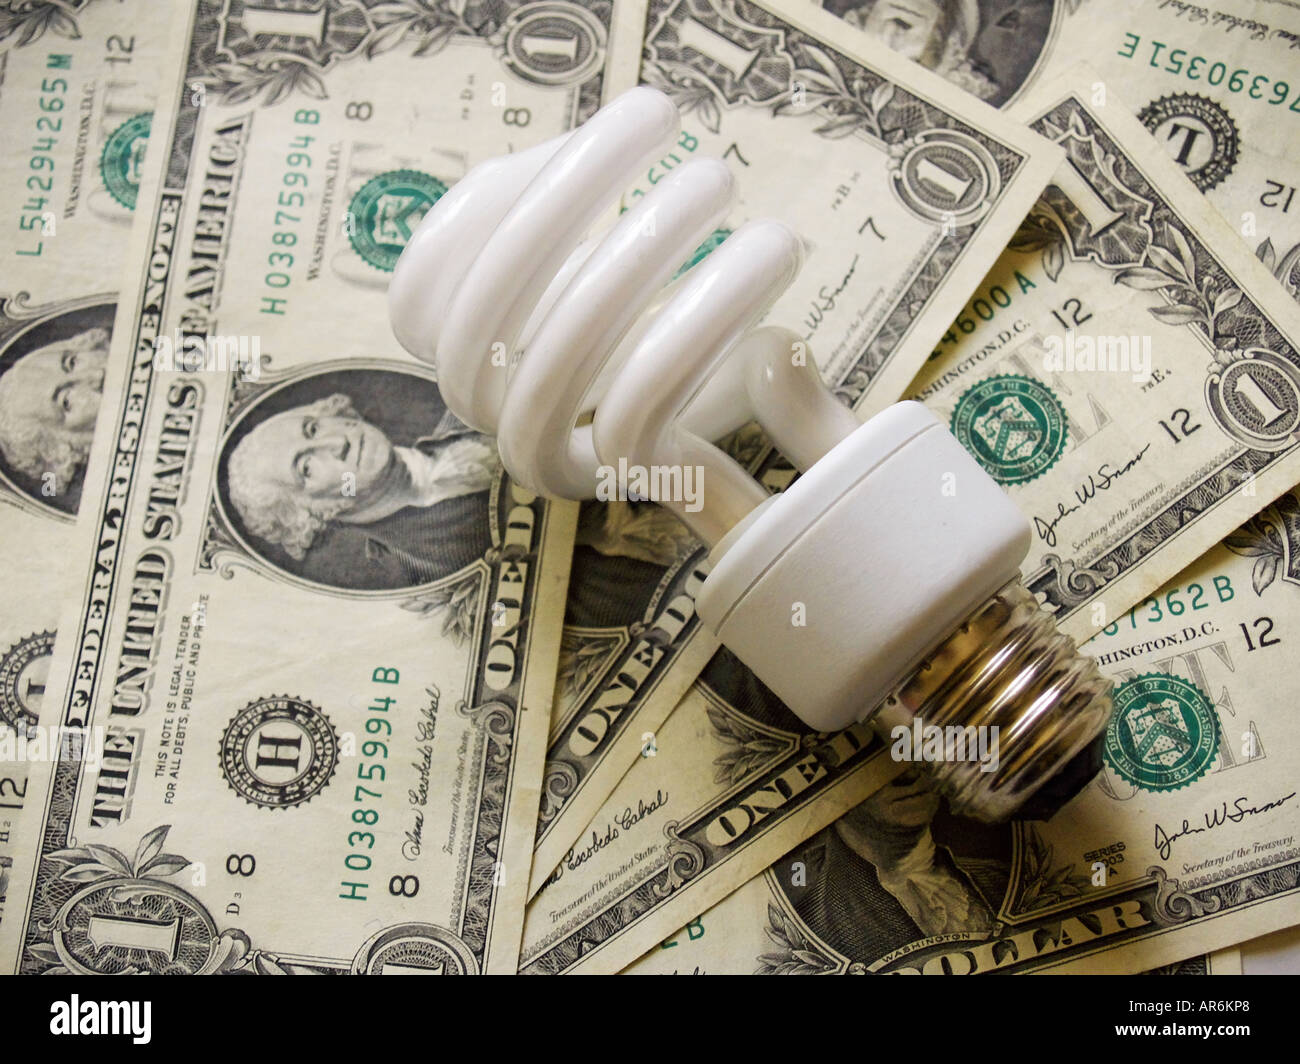 Spiral shaped fluorescent light bulb against a background of dollar bills. Stock Photo